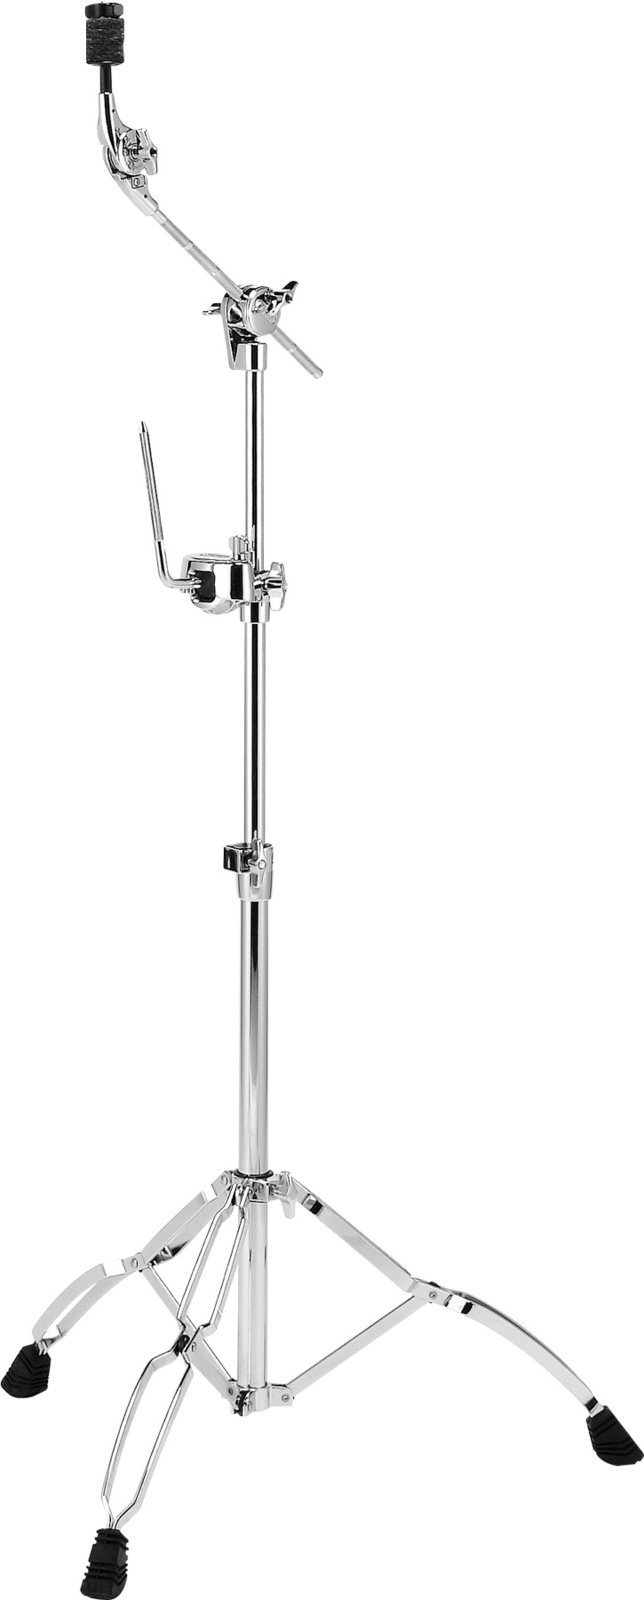 Combined Cymbal Stand Tama HTC77WN Roadpro Combination Cymbal Stand